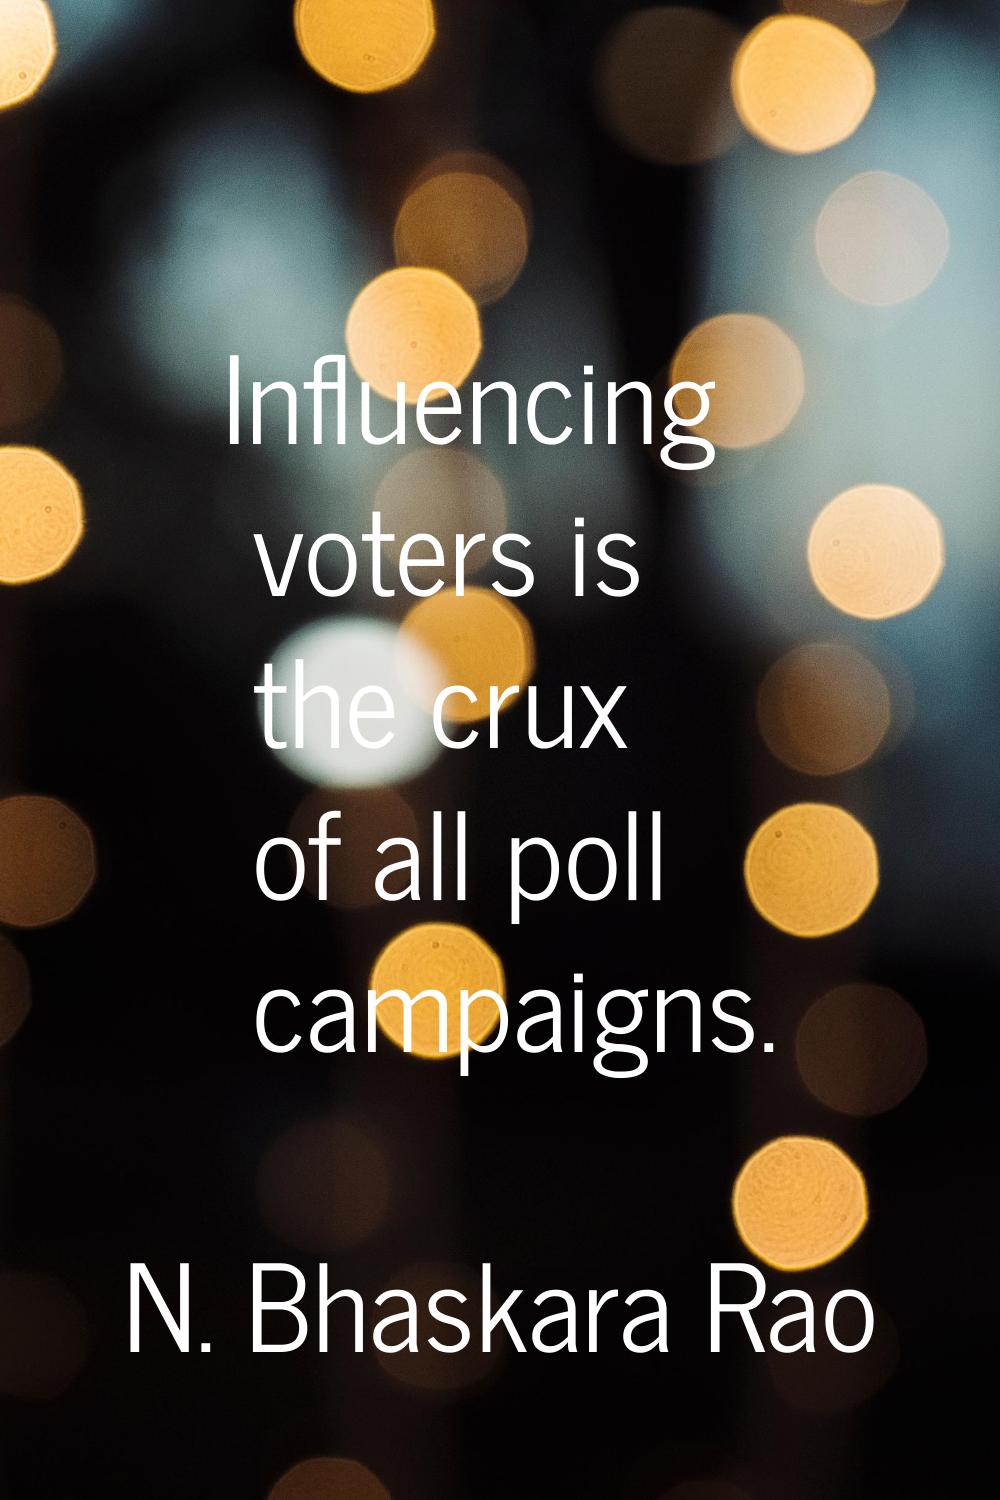 Influencing voters is the crux of all poll campaigns.